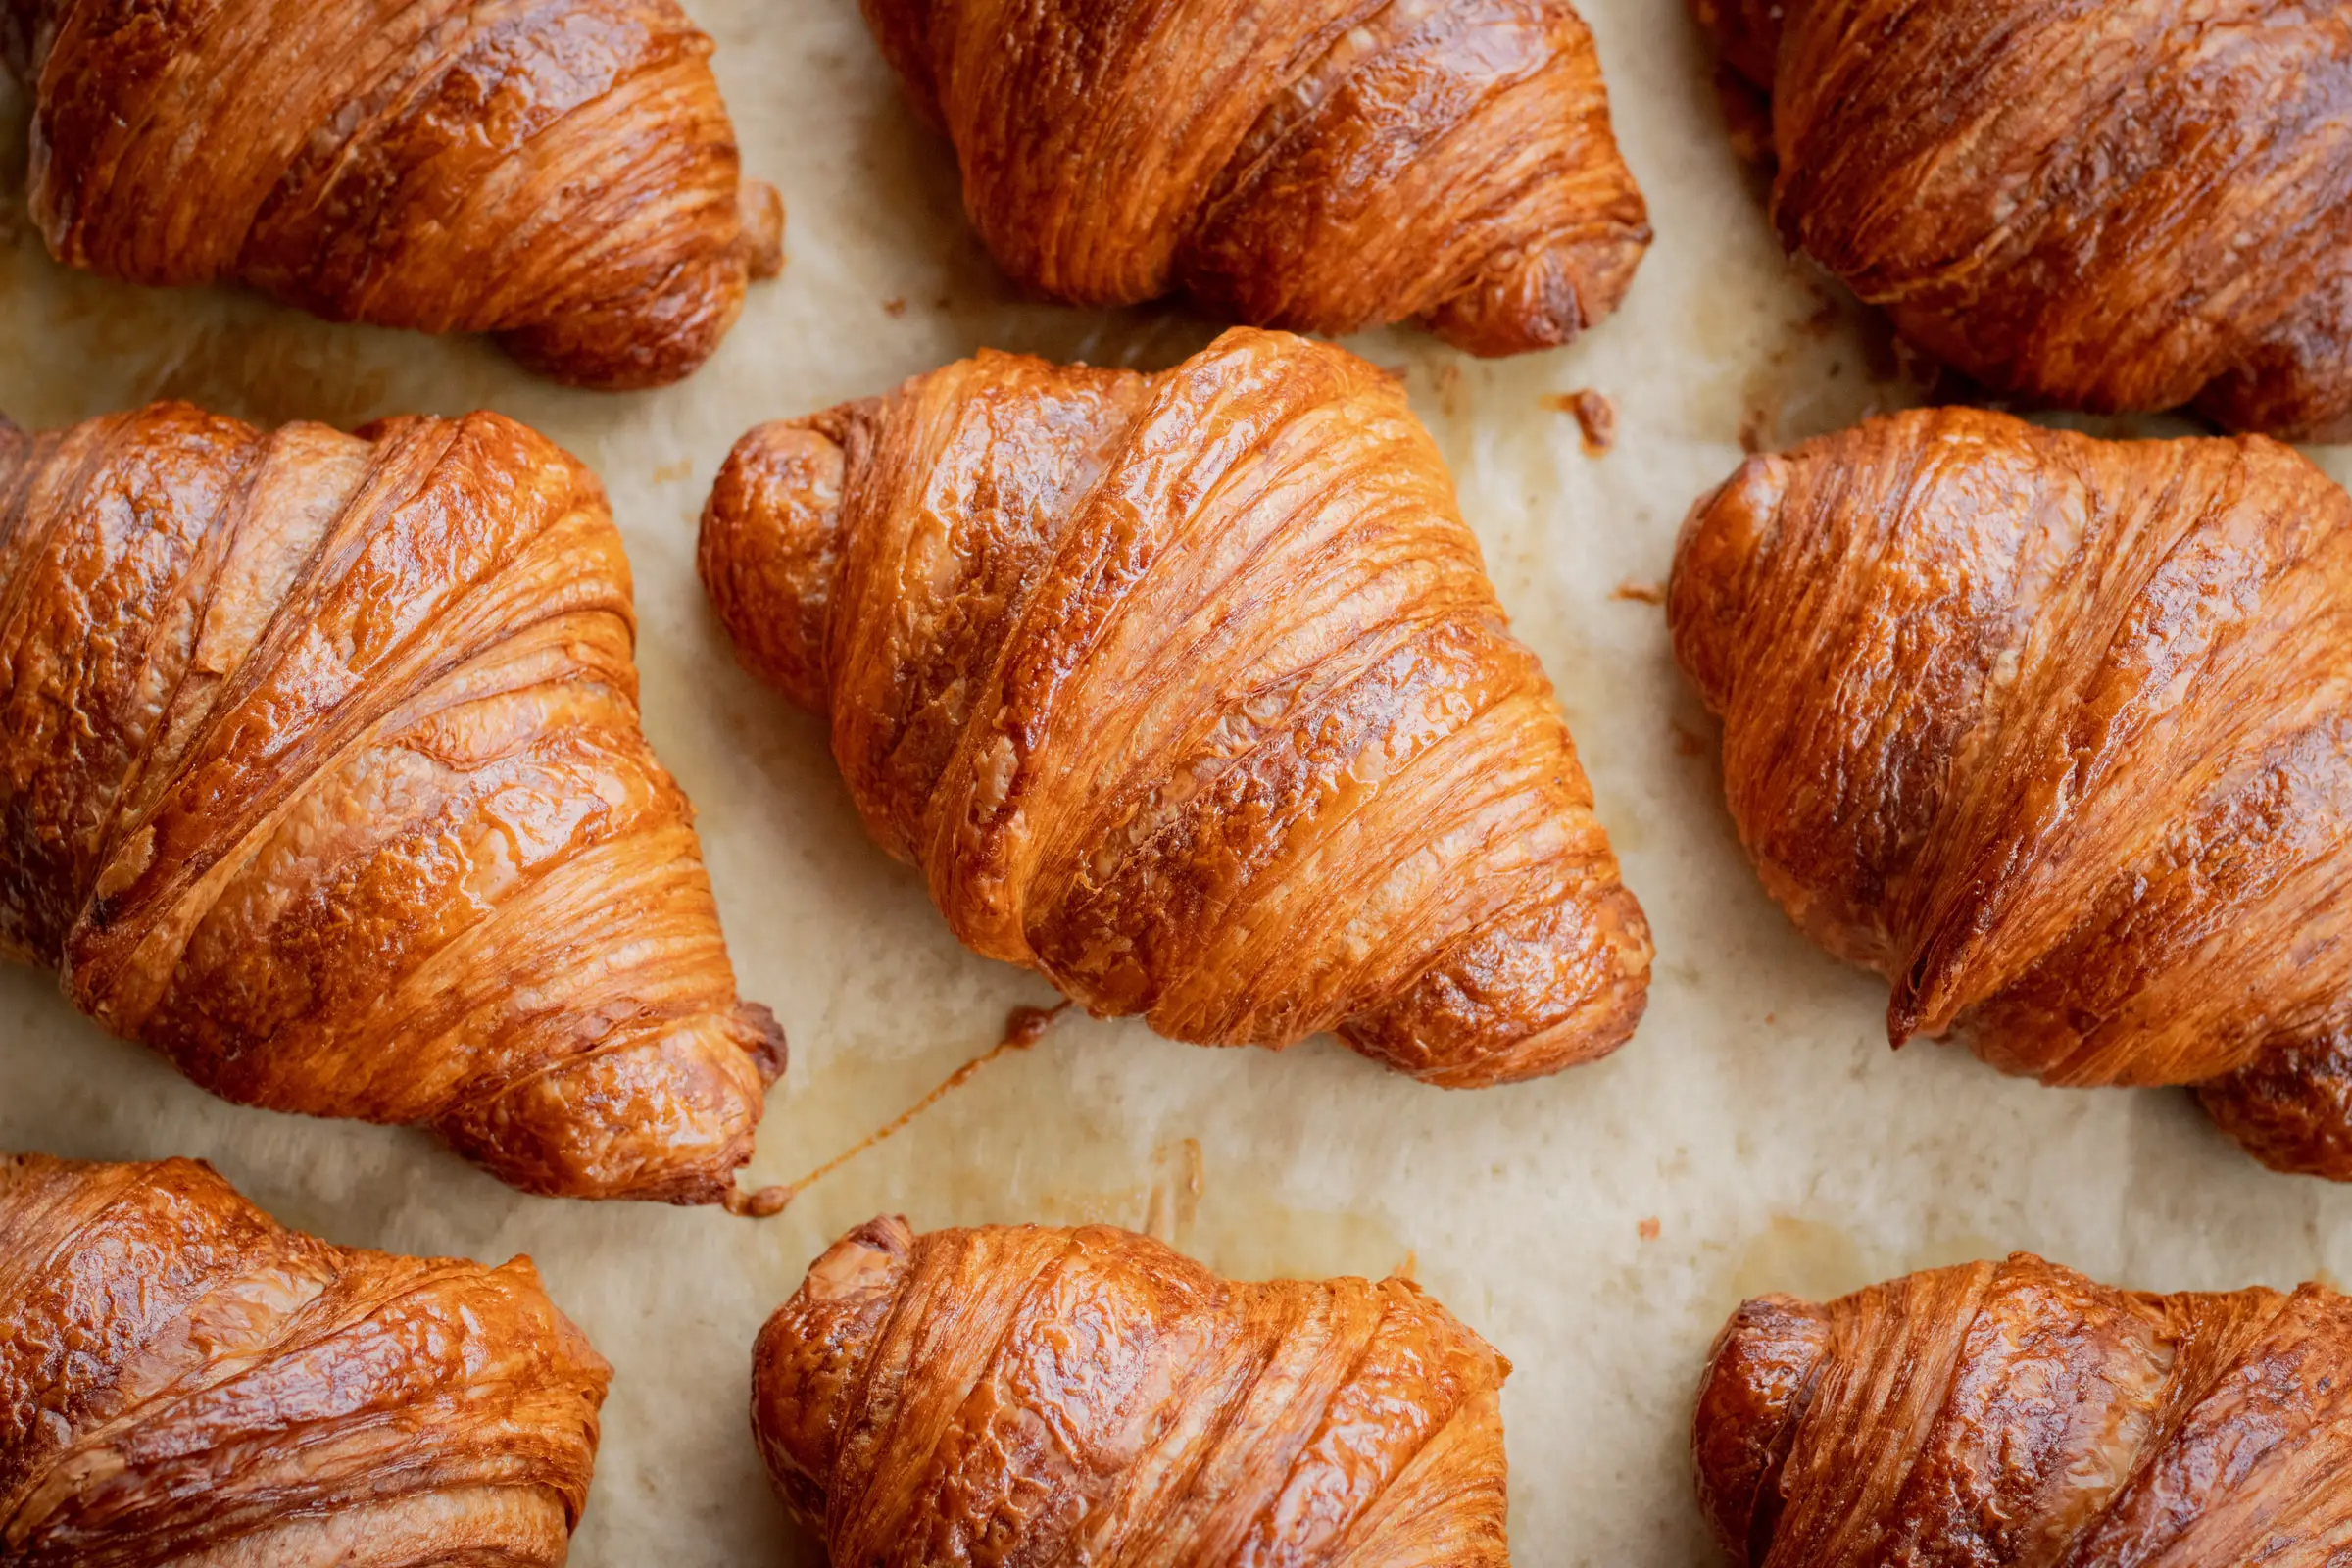 Croissants cooling on a table